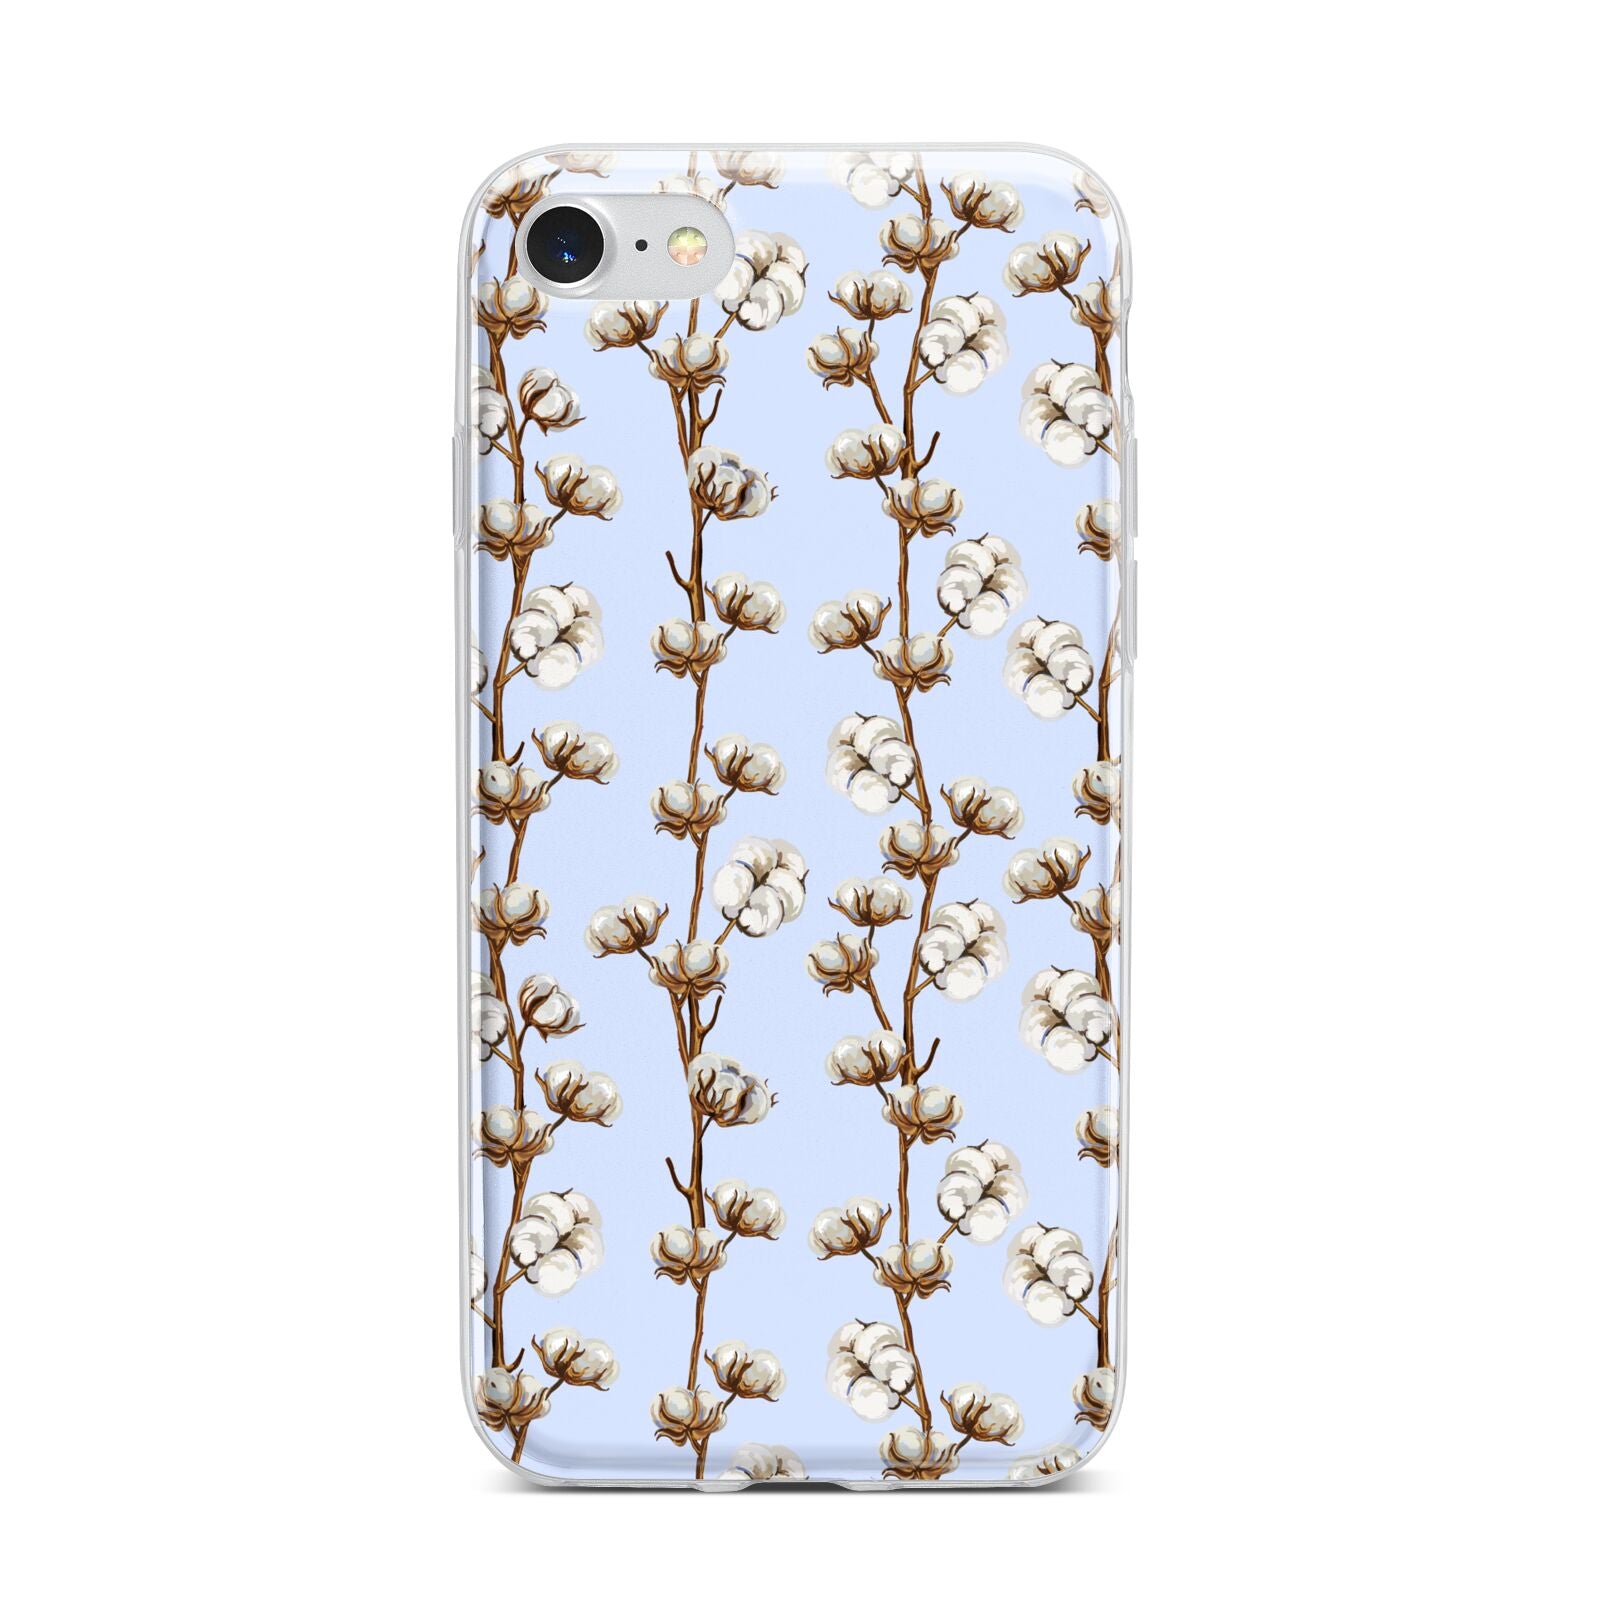 Cotton Branch iPhone 7 Bumper Case on Silver iPhone